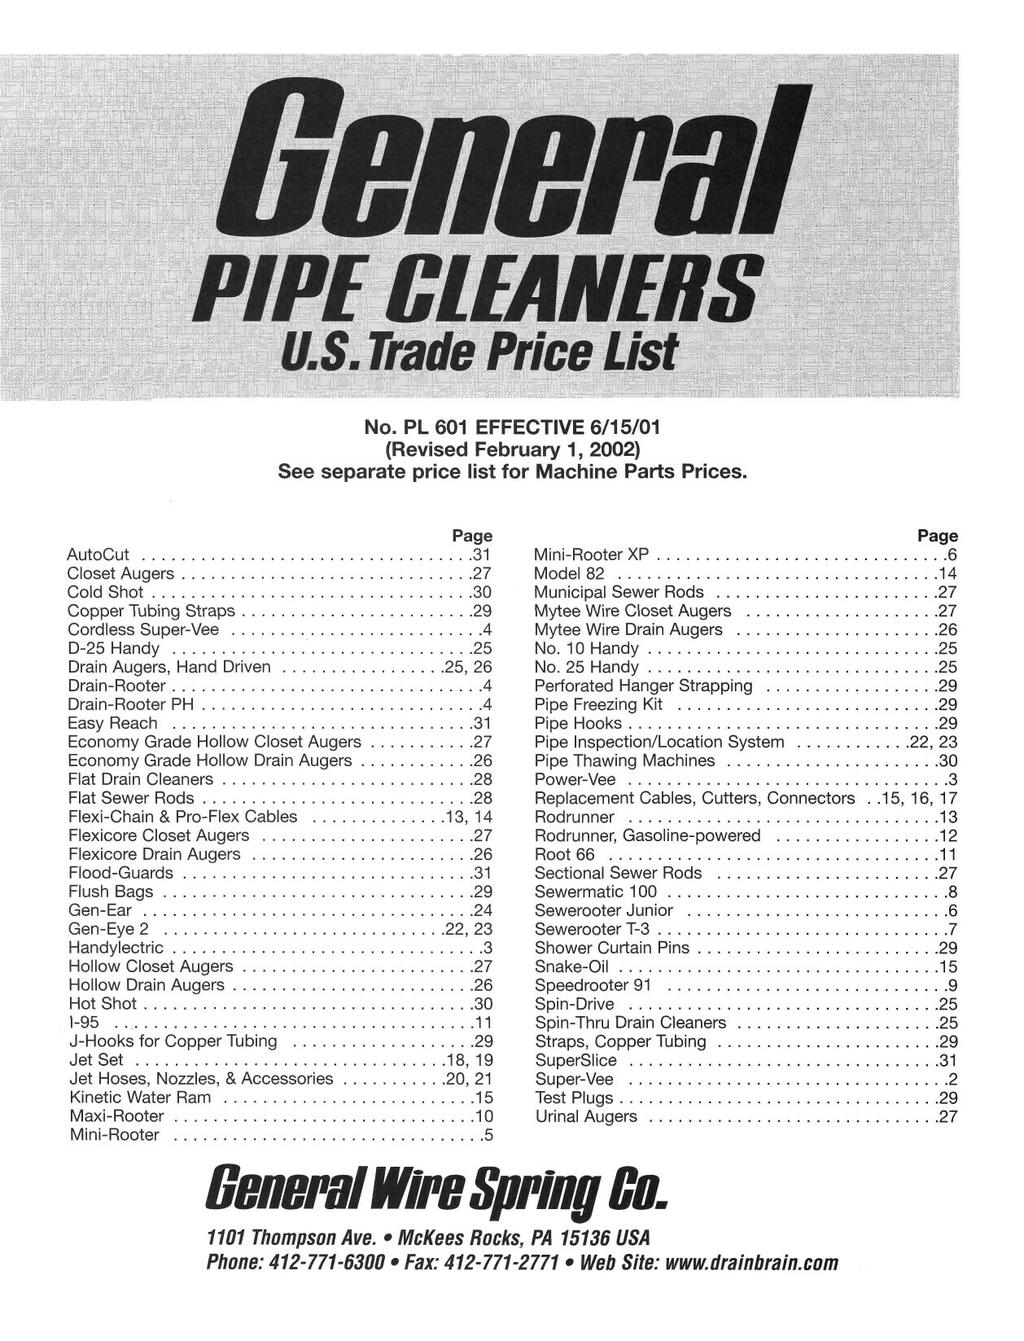 PIPE GLEANERS S.Trade List No. PL 601 EFFECTIVE 6/15/01 (Revised February 1, 2002) See separate price list for Machine Parts Prices.